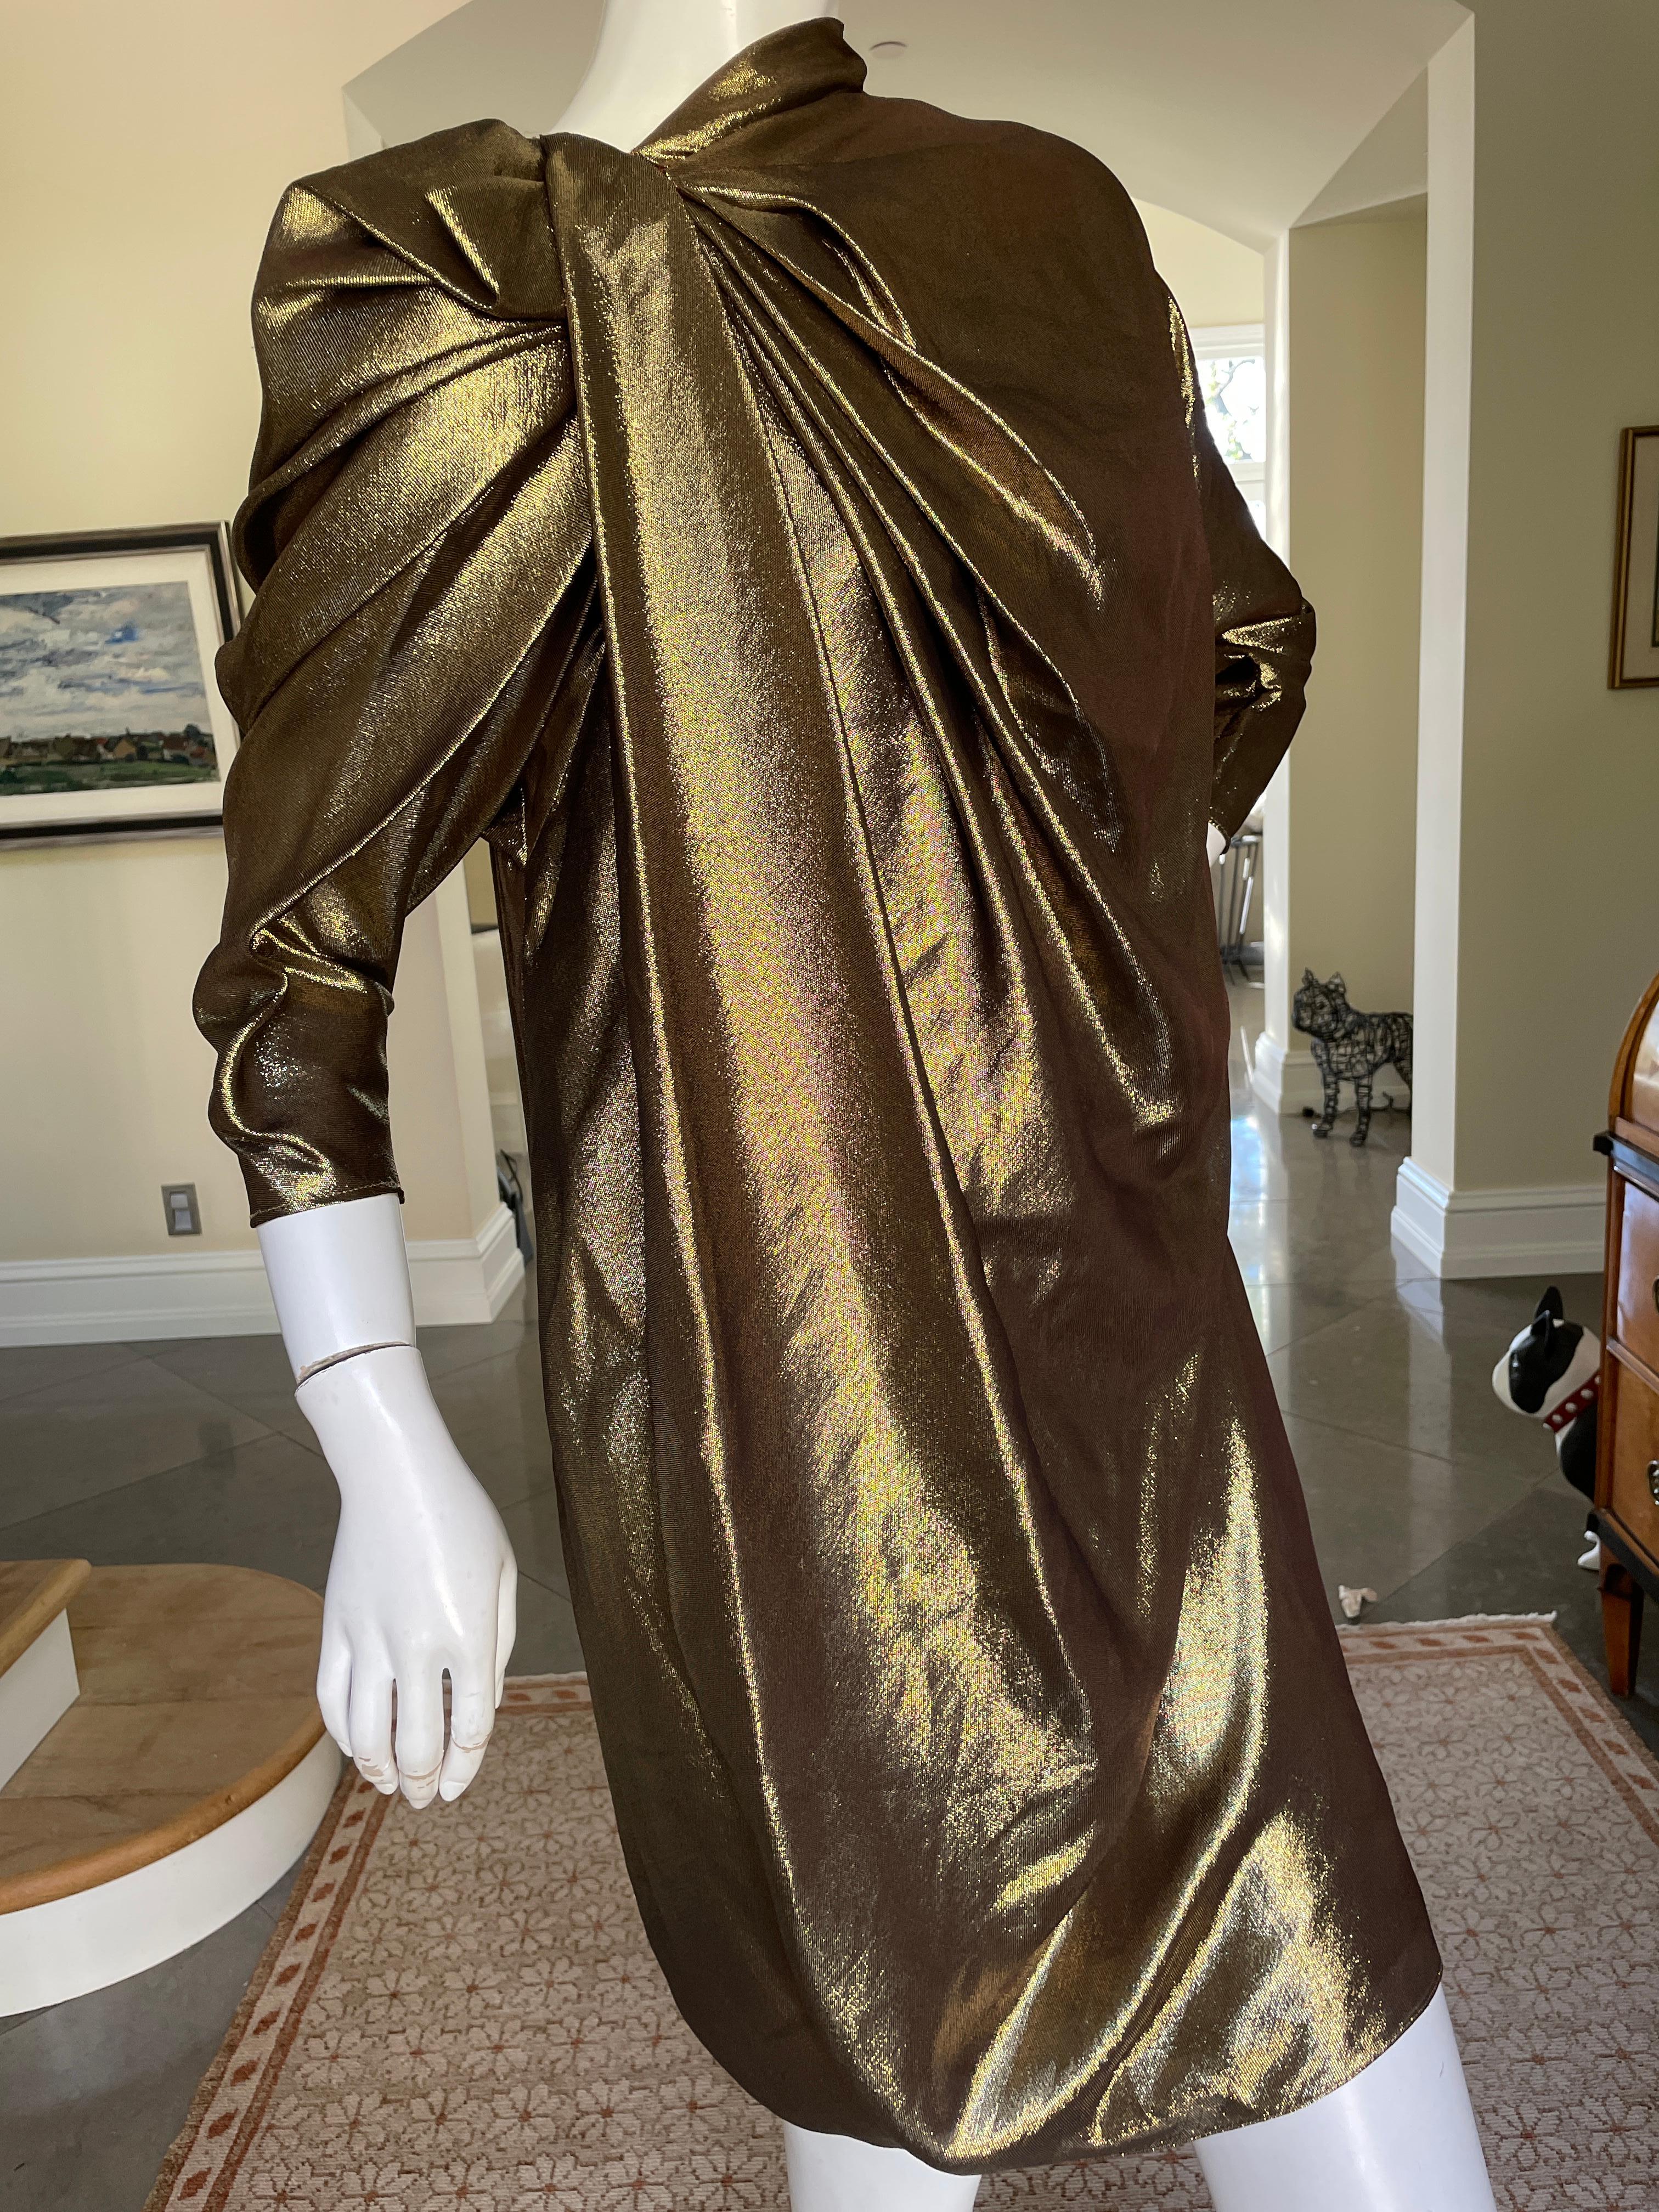 Lanvin by Alber Elbaz Metallic Gold Goddess Dress Fall 2009 In Excellent Condition In Cloverdale, CA